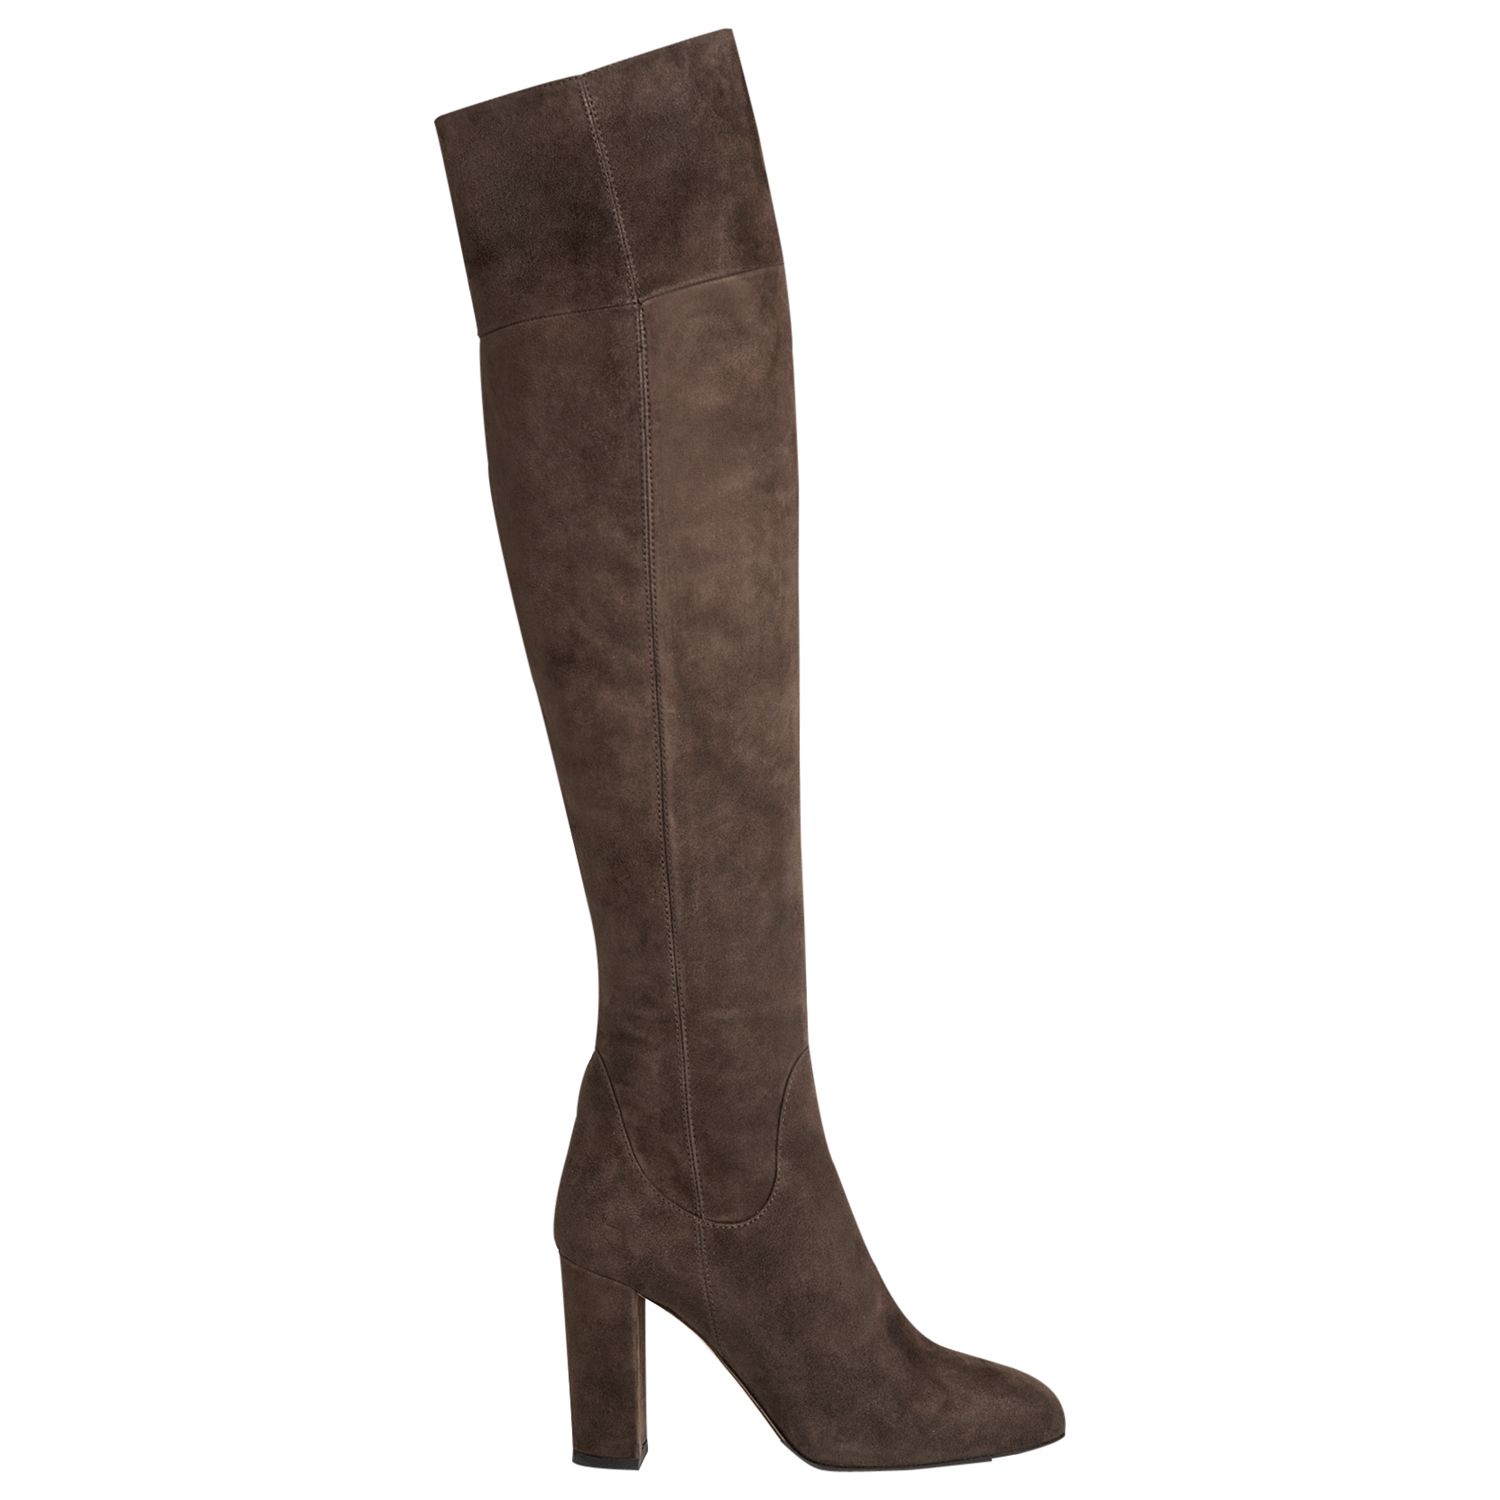 L.K. Bennett Kaelynn Over the Knee Boots, Charcoal Suede